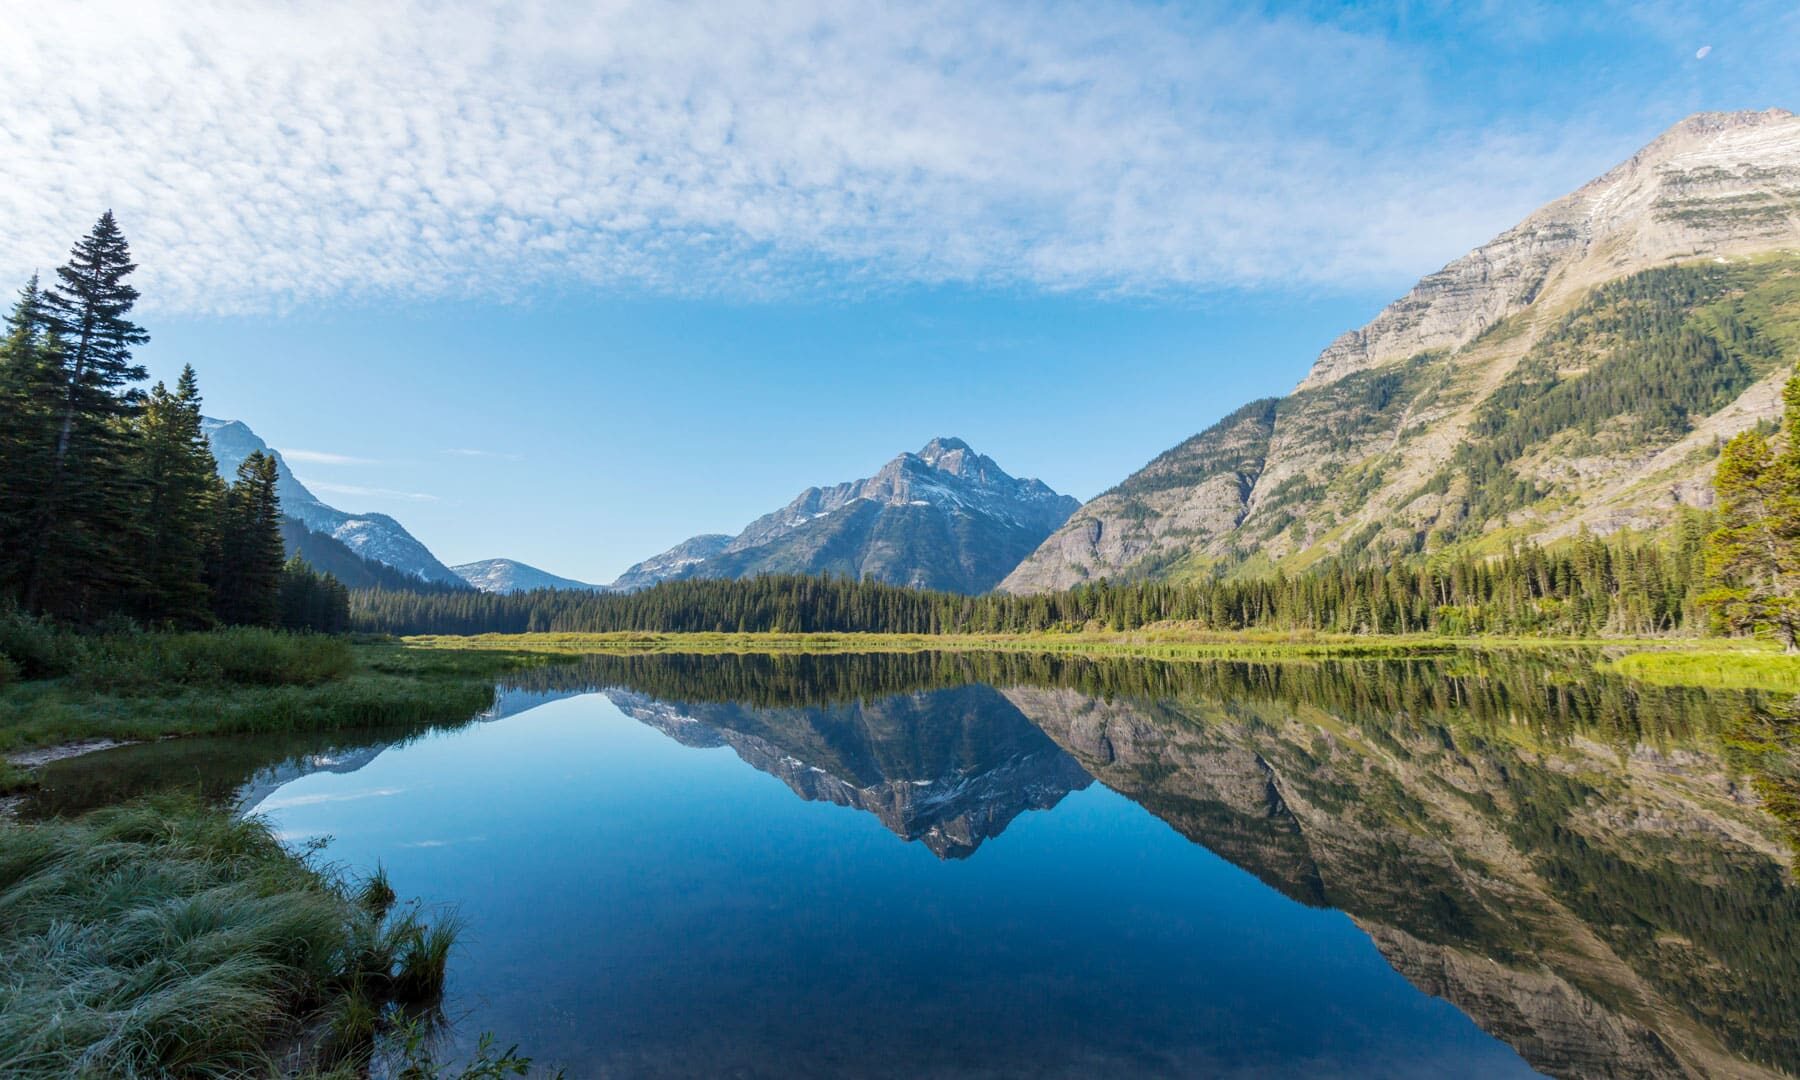 The Best Hotels Near Glacier National Park in Montana